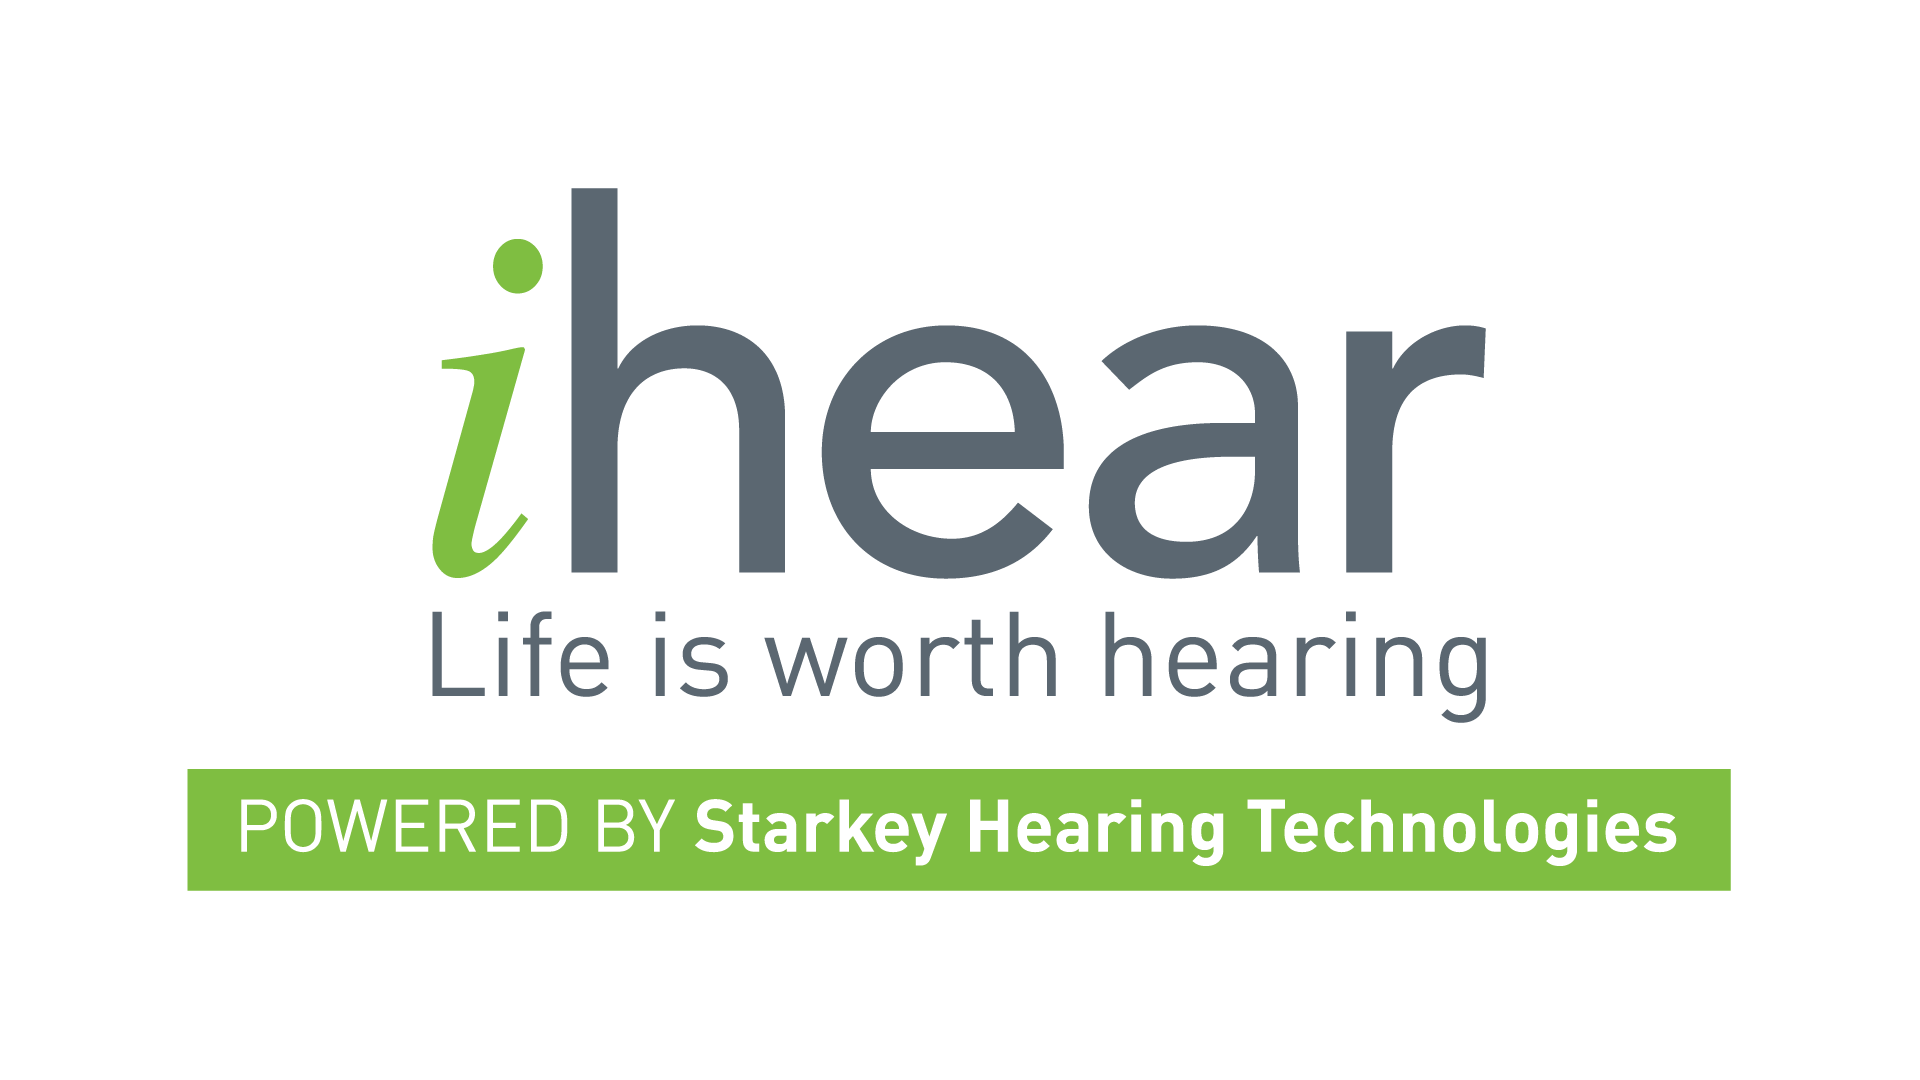 The three different types of hearing loss logo